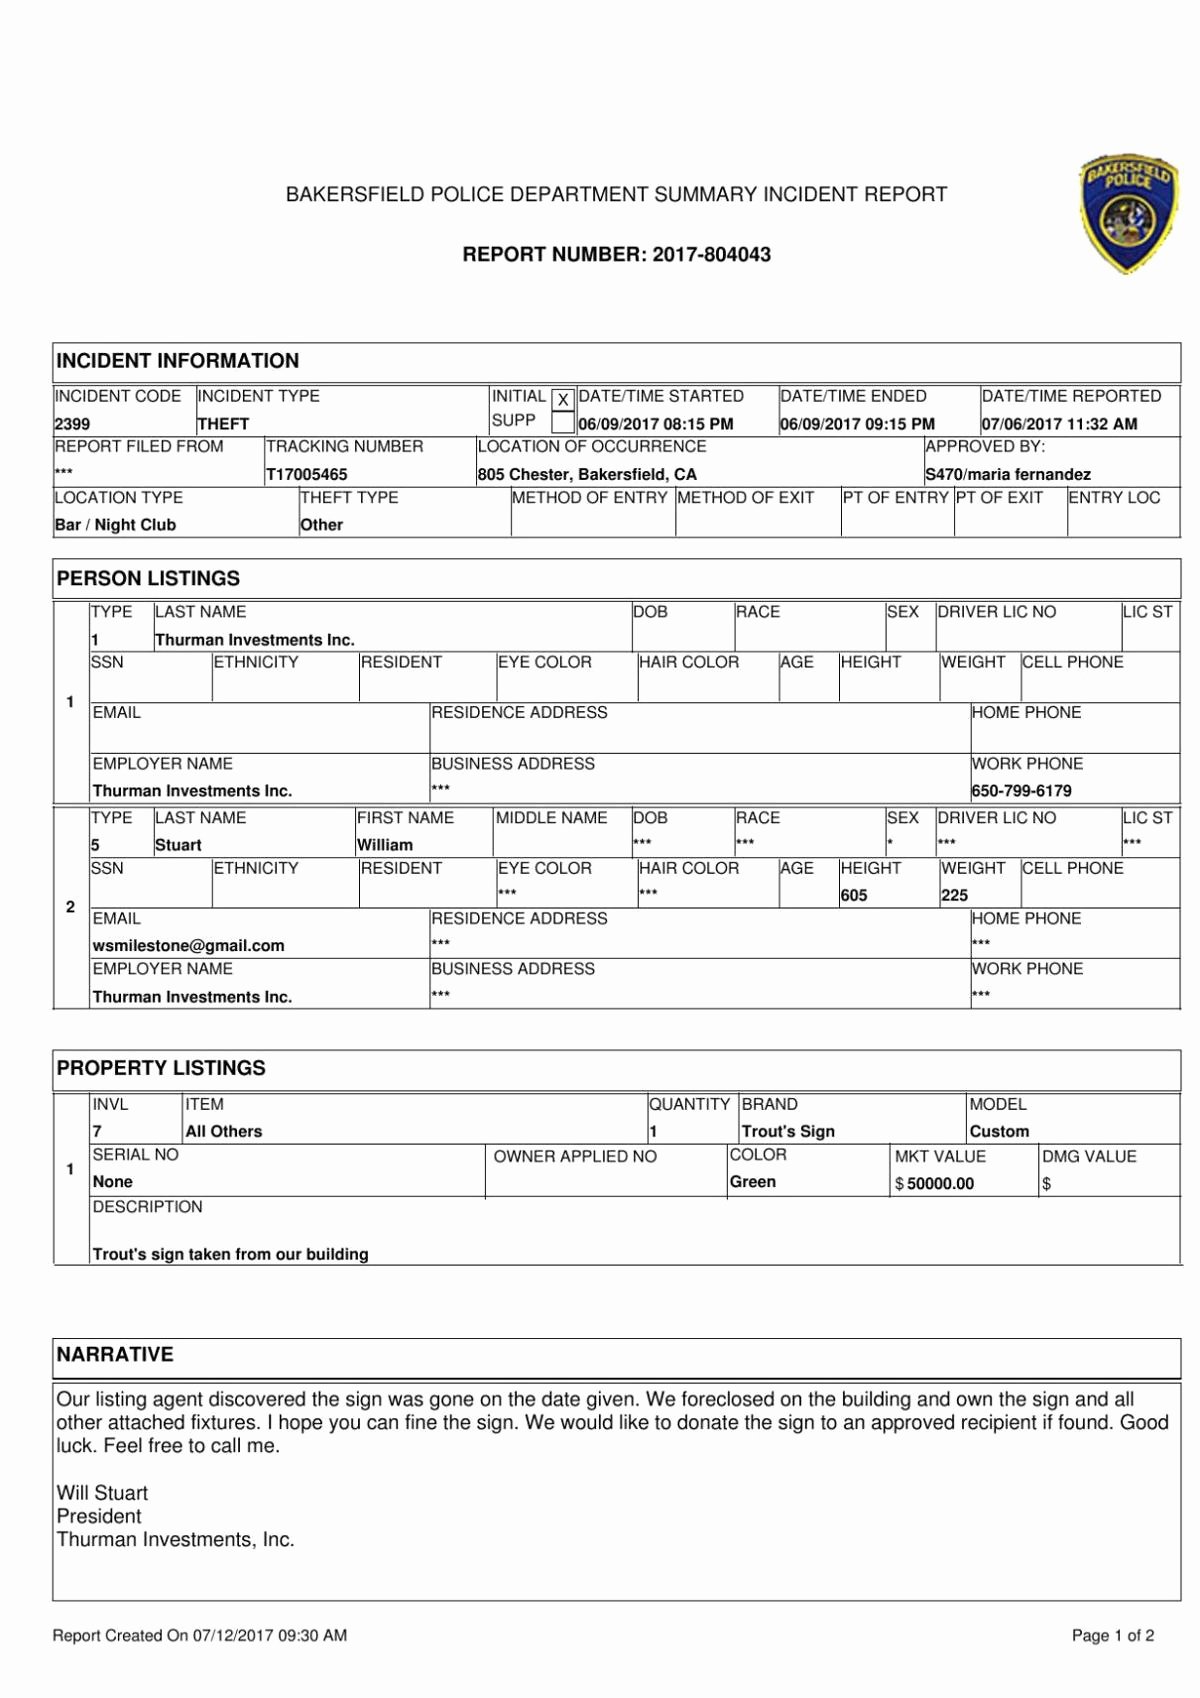 Example Of Accident Report Lovely Bakersfield Police Department Incident Report